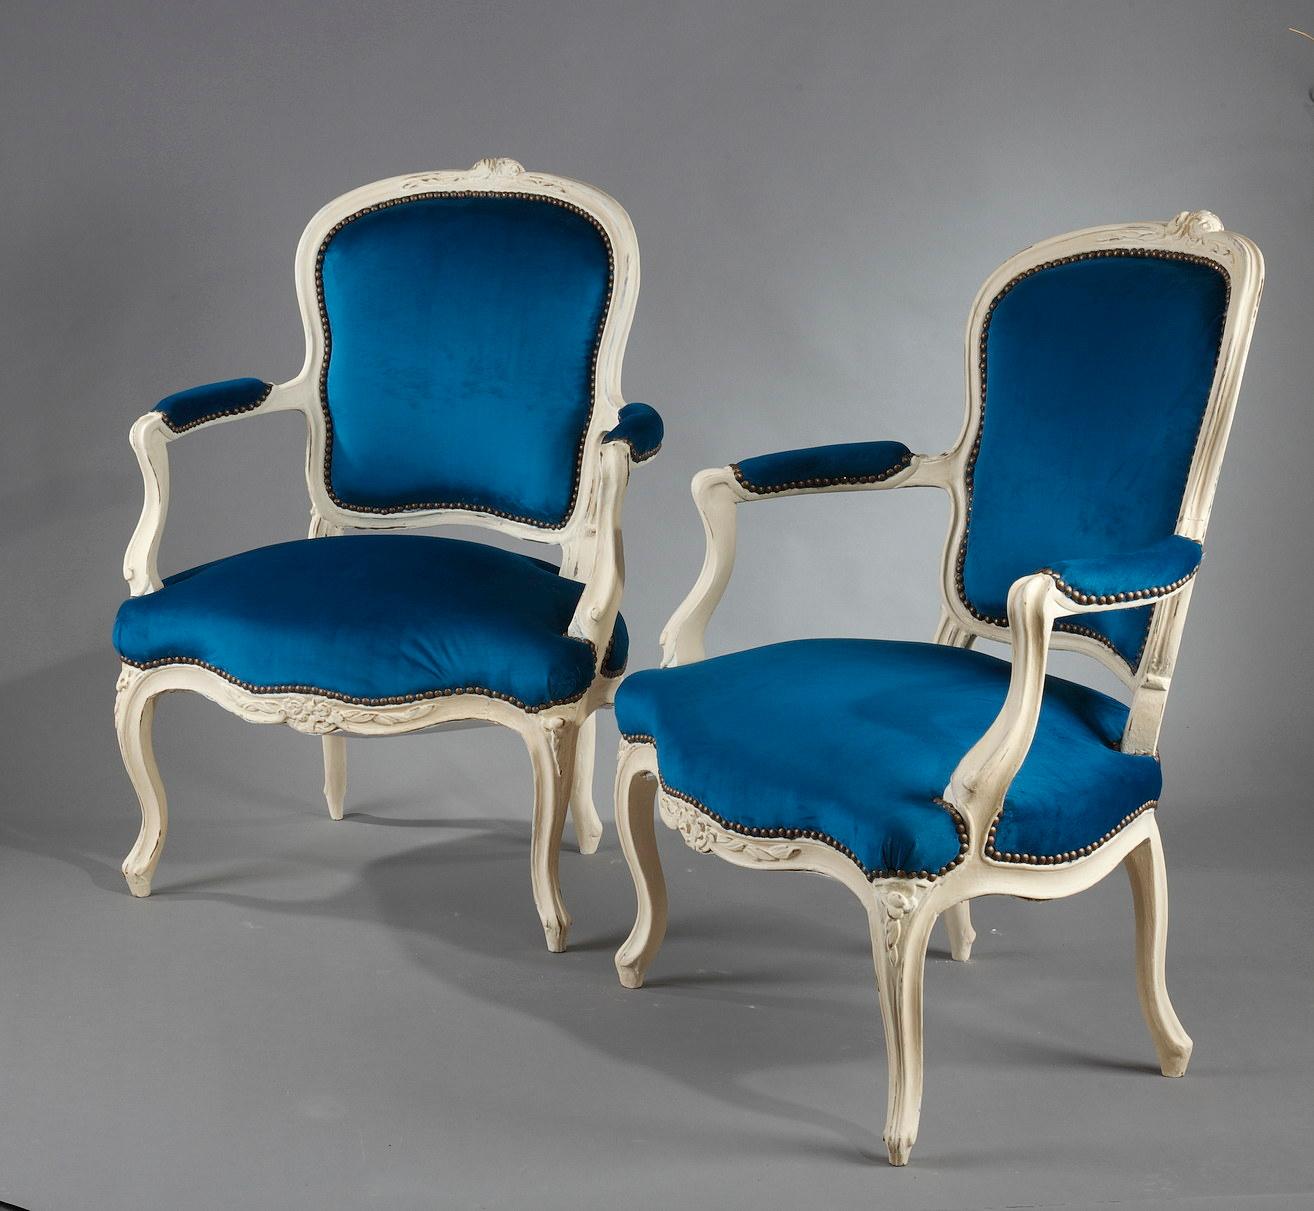 Late 18th Century Four Peacock Blue Velvet Armchairs from the Louis XV Period For Sale